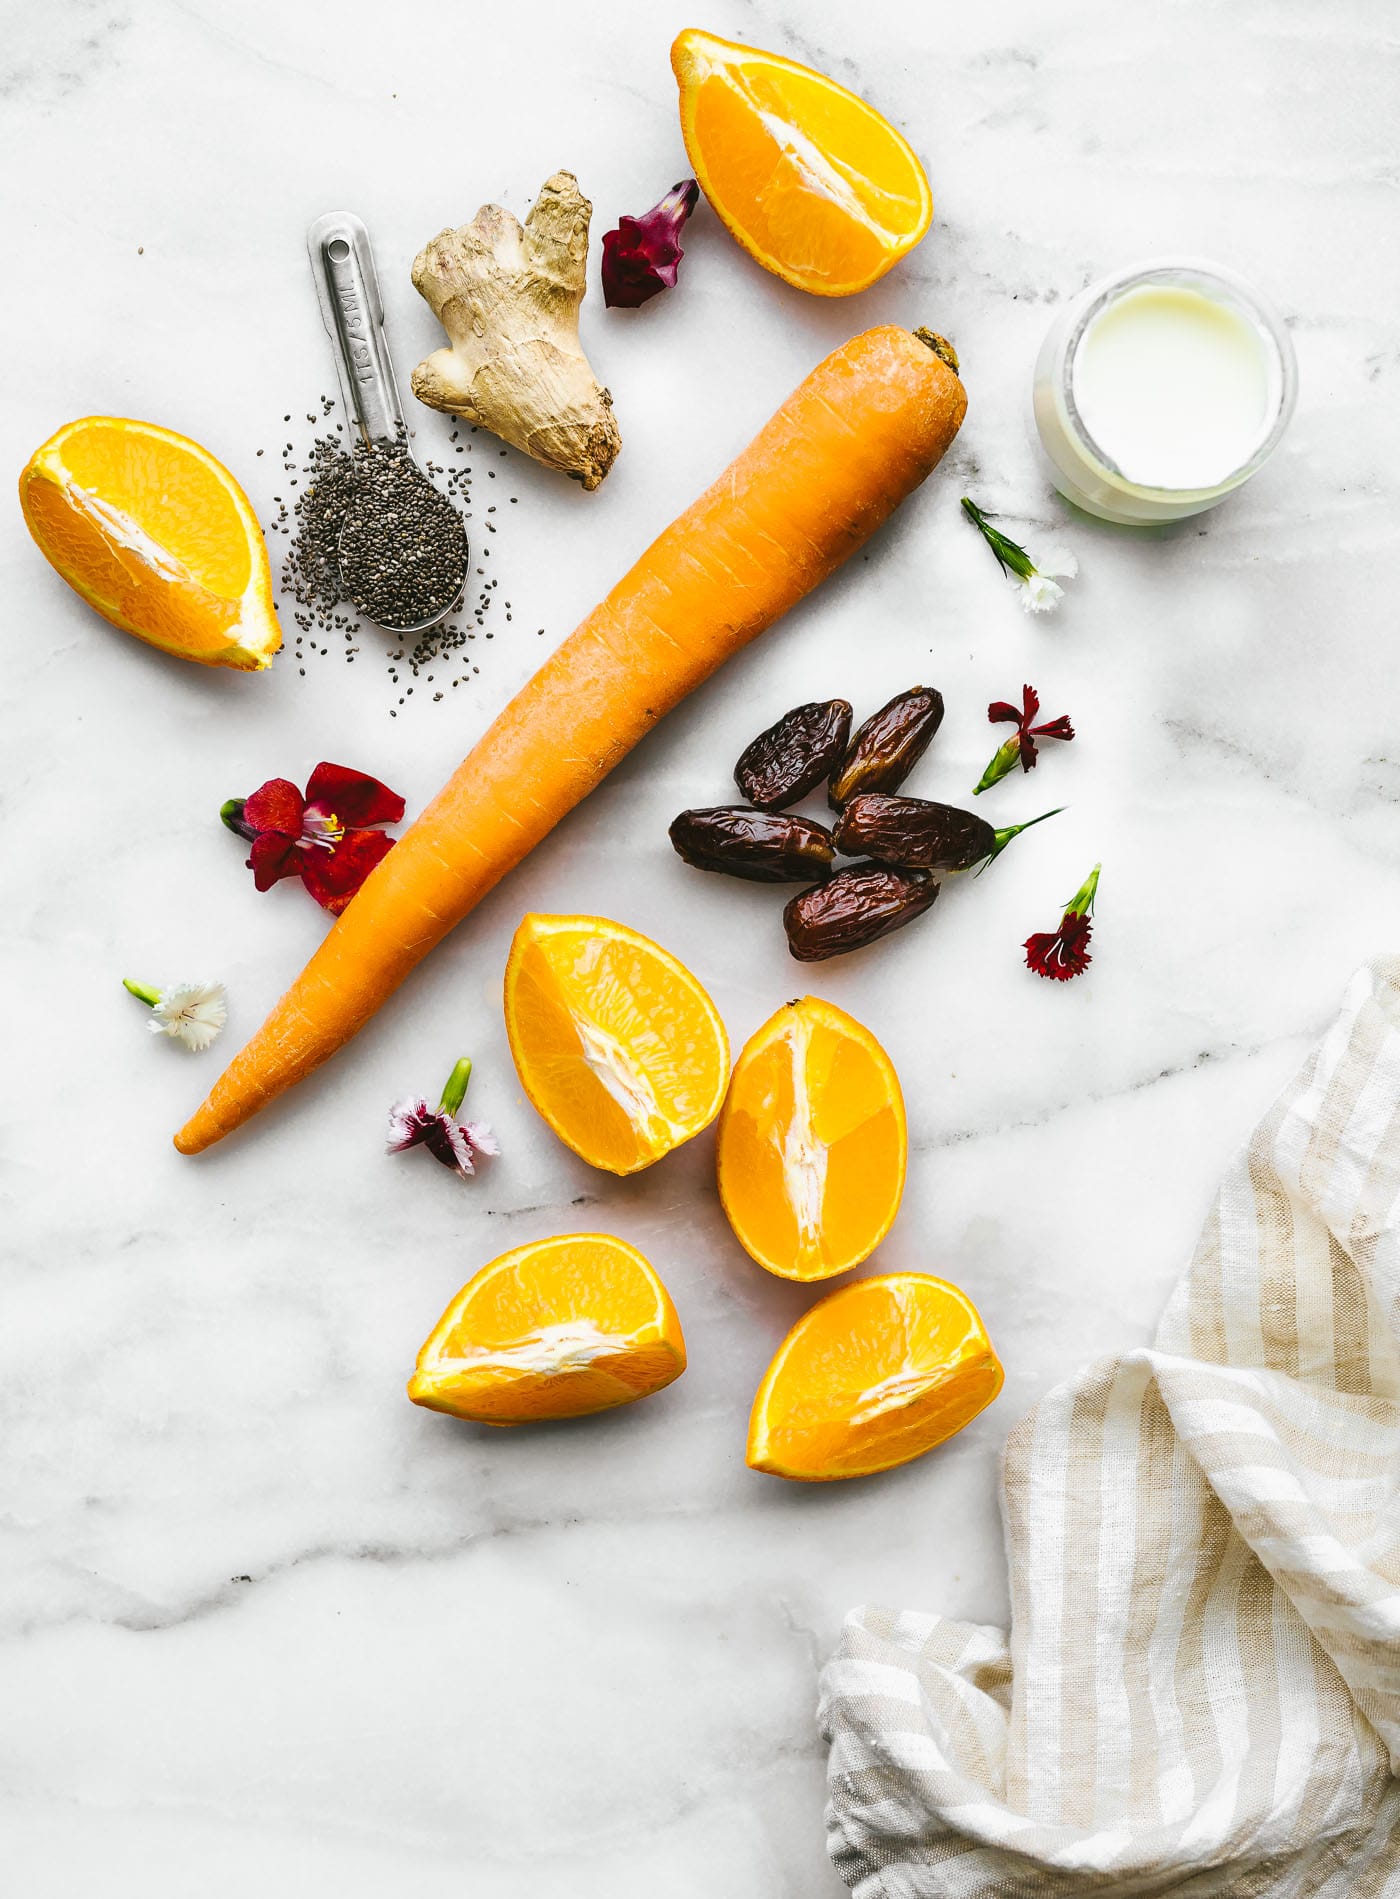 Overhead image of smoothie ingredients for dairy free smoothies